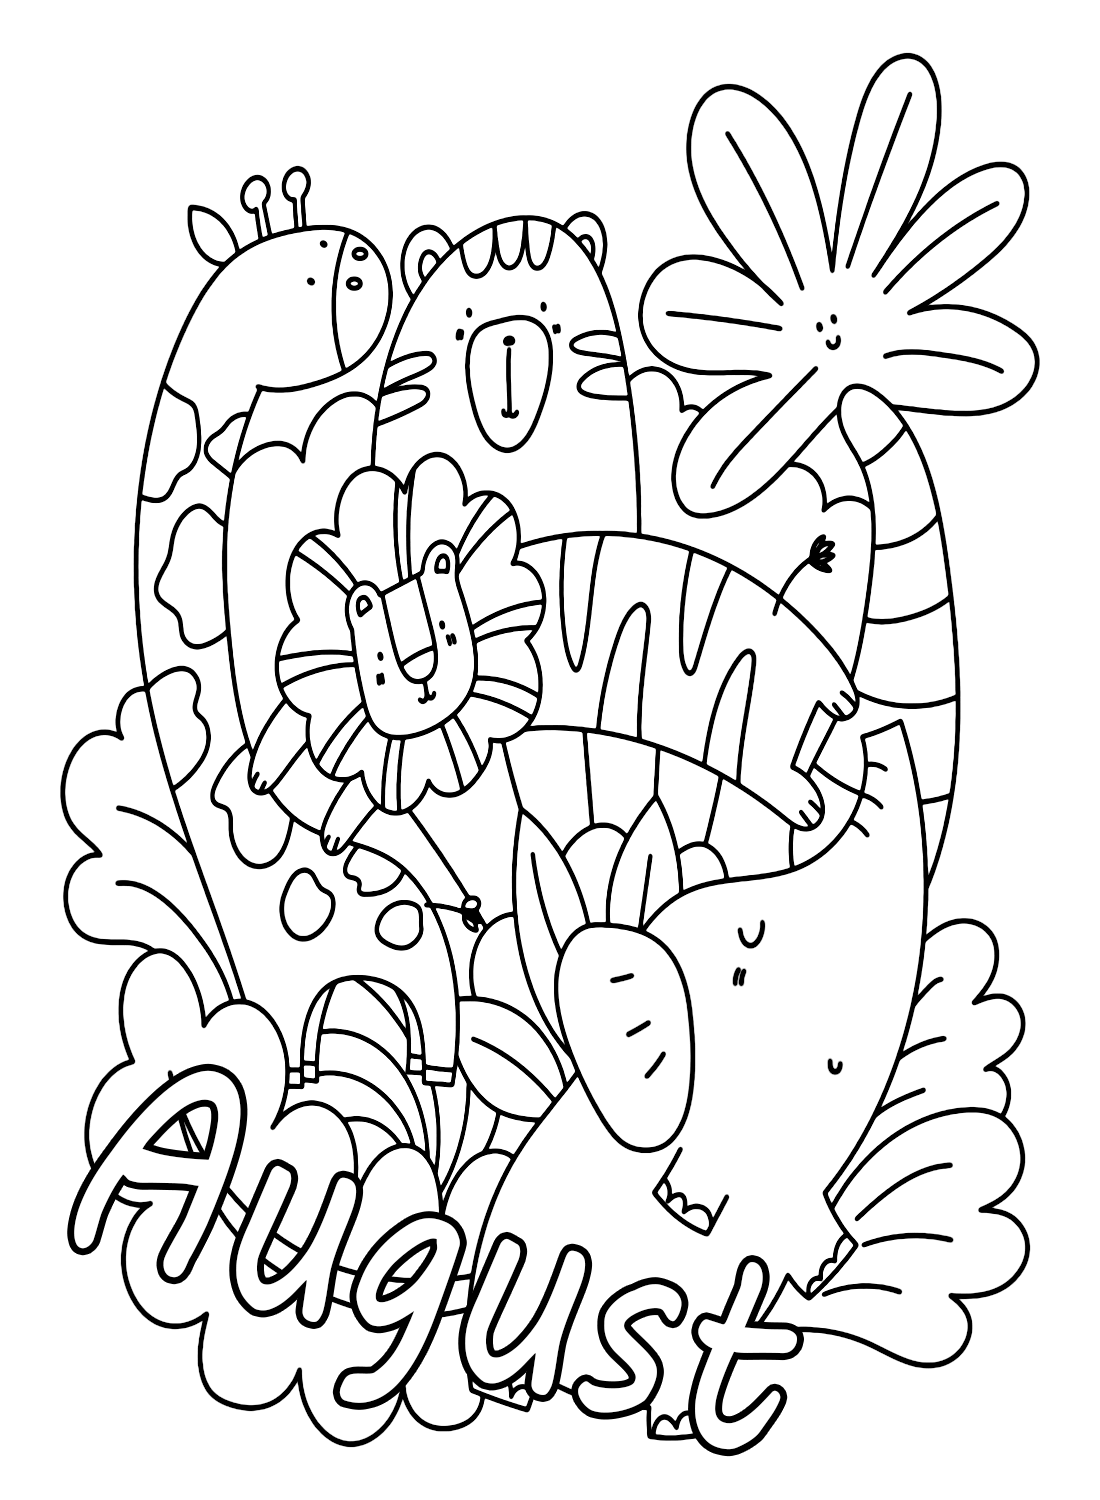 August with Cute Animals Coloring Pages